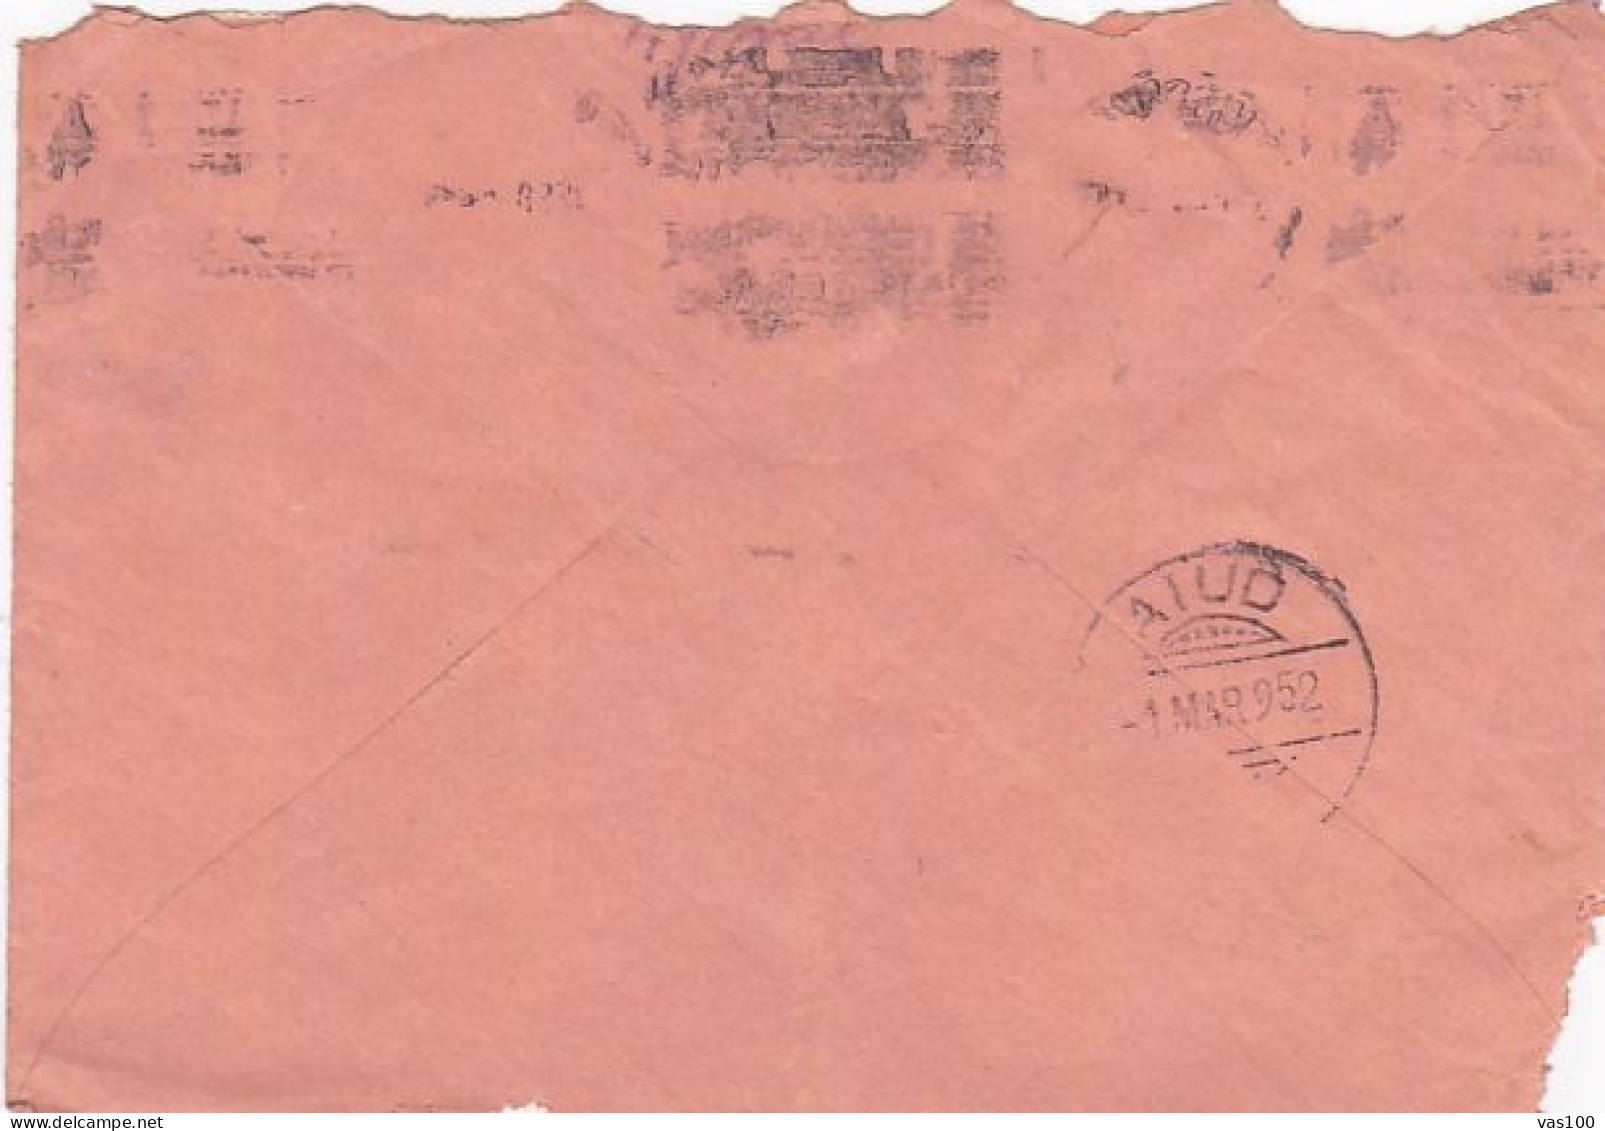 ION LUCA CARAGIALE- WRITER, 55 BANI OVERPRINT STAMP ON COVER, 1952, ROMANIA - Lettres & Documents